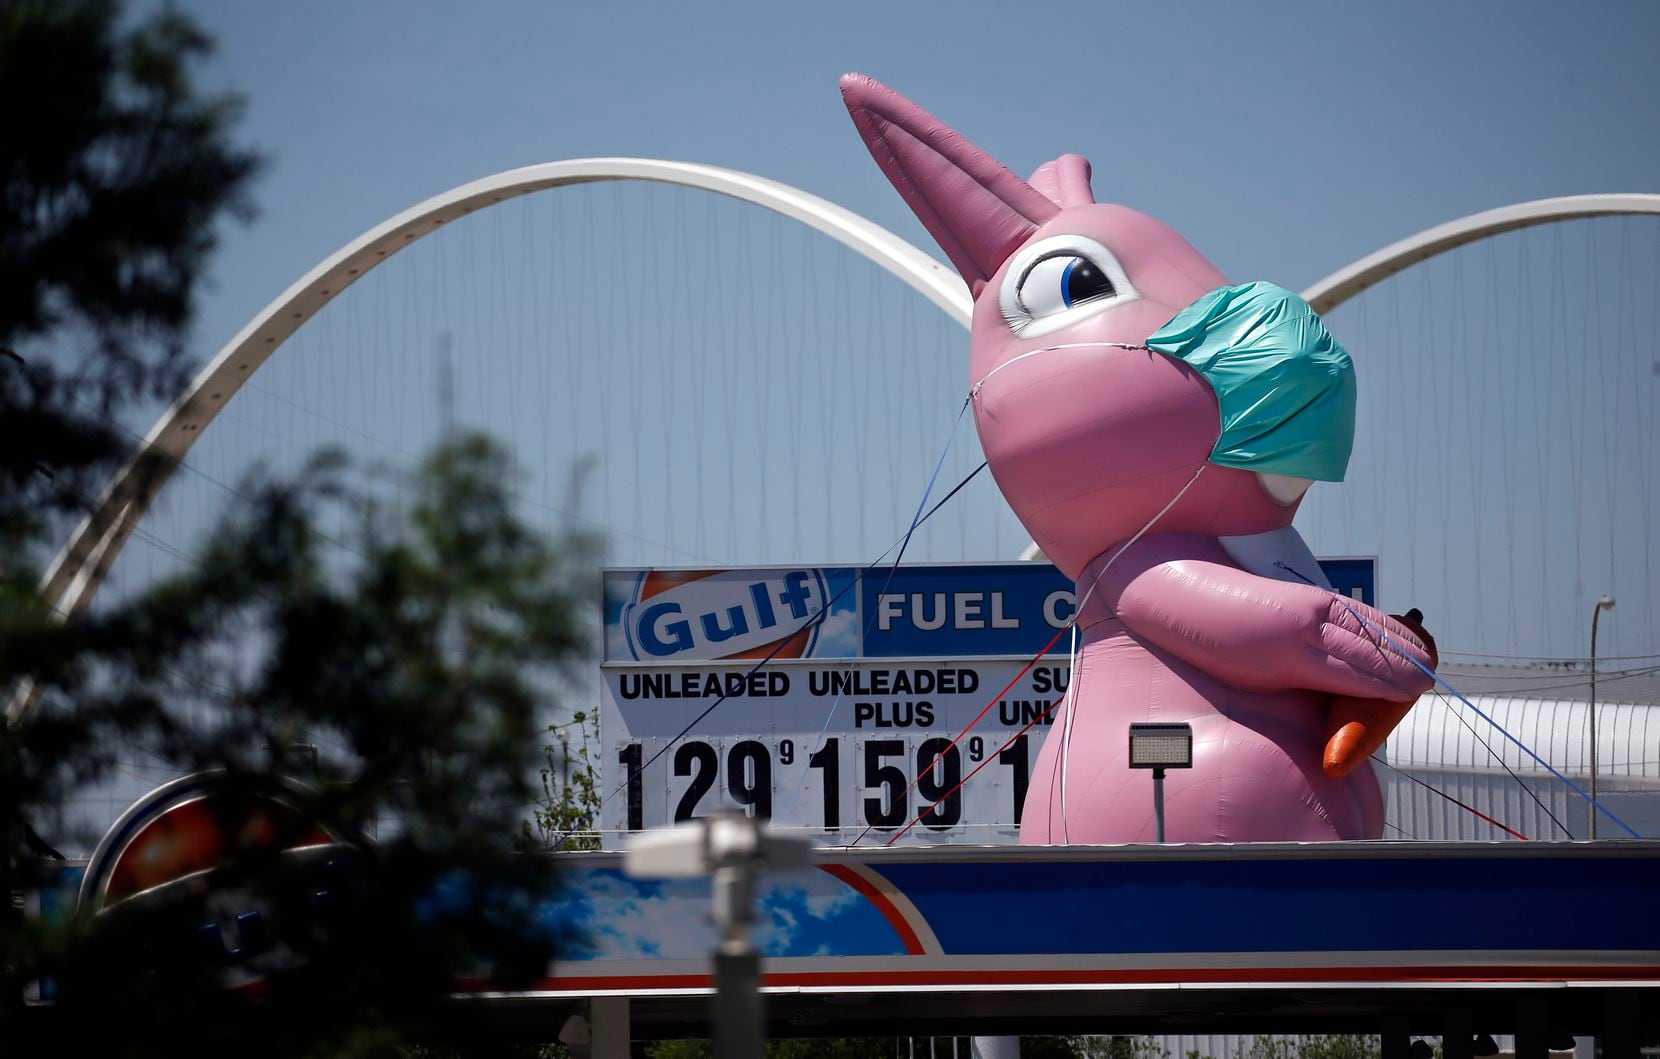 An inflatable Easter Bunny in a protective mask grabbed attention at the Fuel City gas...